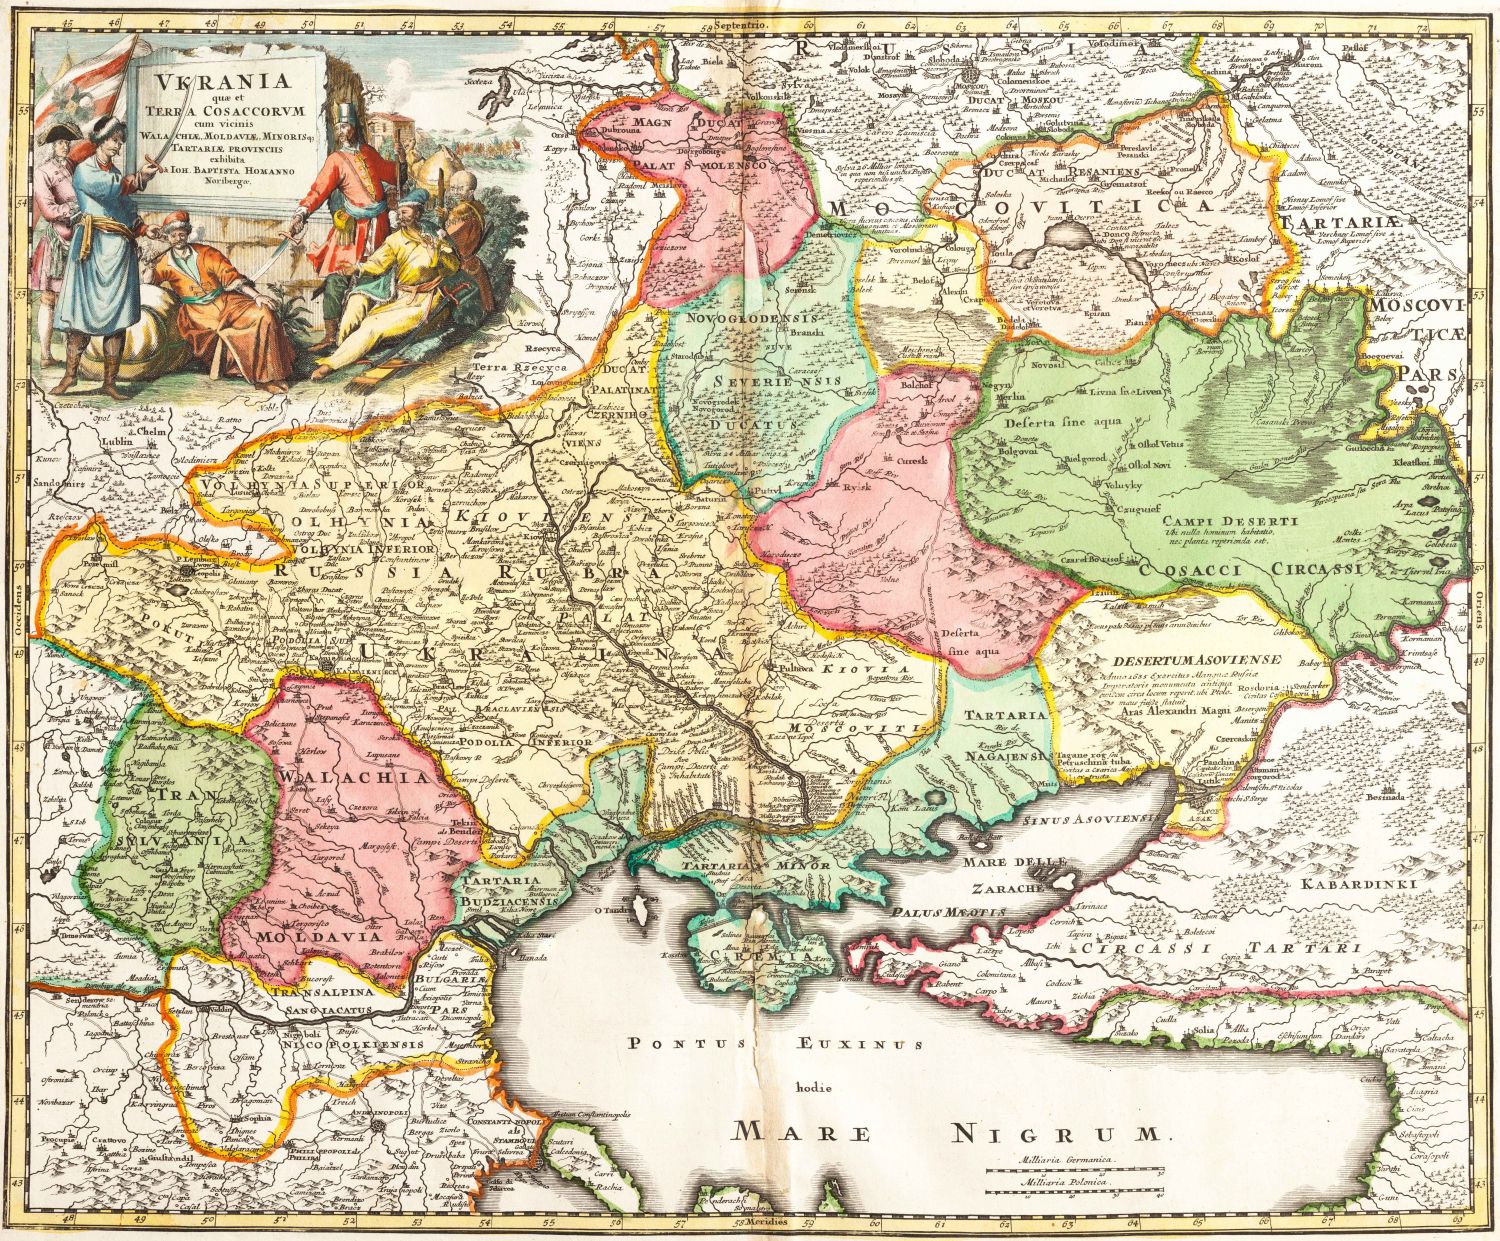 A 1720 map of Ukraine shows its territory significantly greater than today.